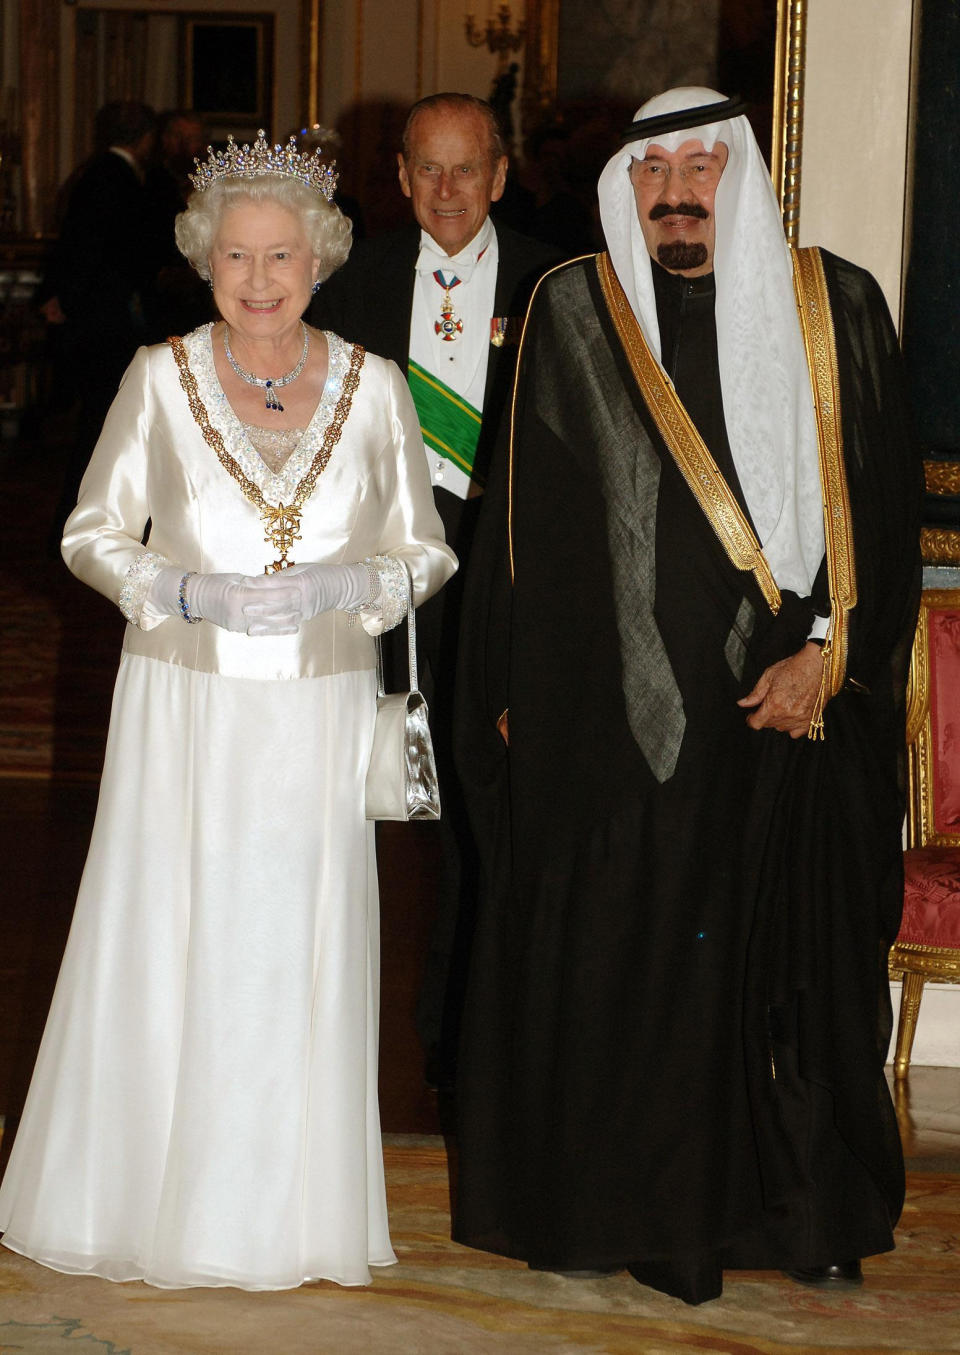 A group photograph of King Abdullah of Saudi Arabia (right) with Queen Elizabeth II (left) and The Duke of Edinburgh (centre) before the State Banquet at Buckingham Palace in London after the first day of the Saudi Kings visit.   (Photo by John Stillwell - PA Images/PA Images via Getty Images)